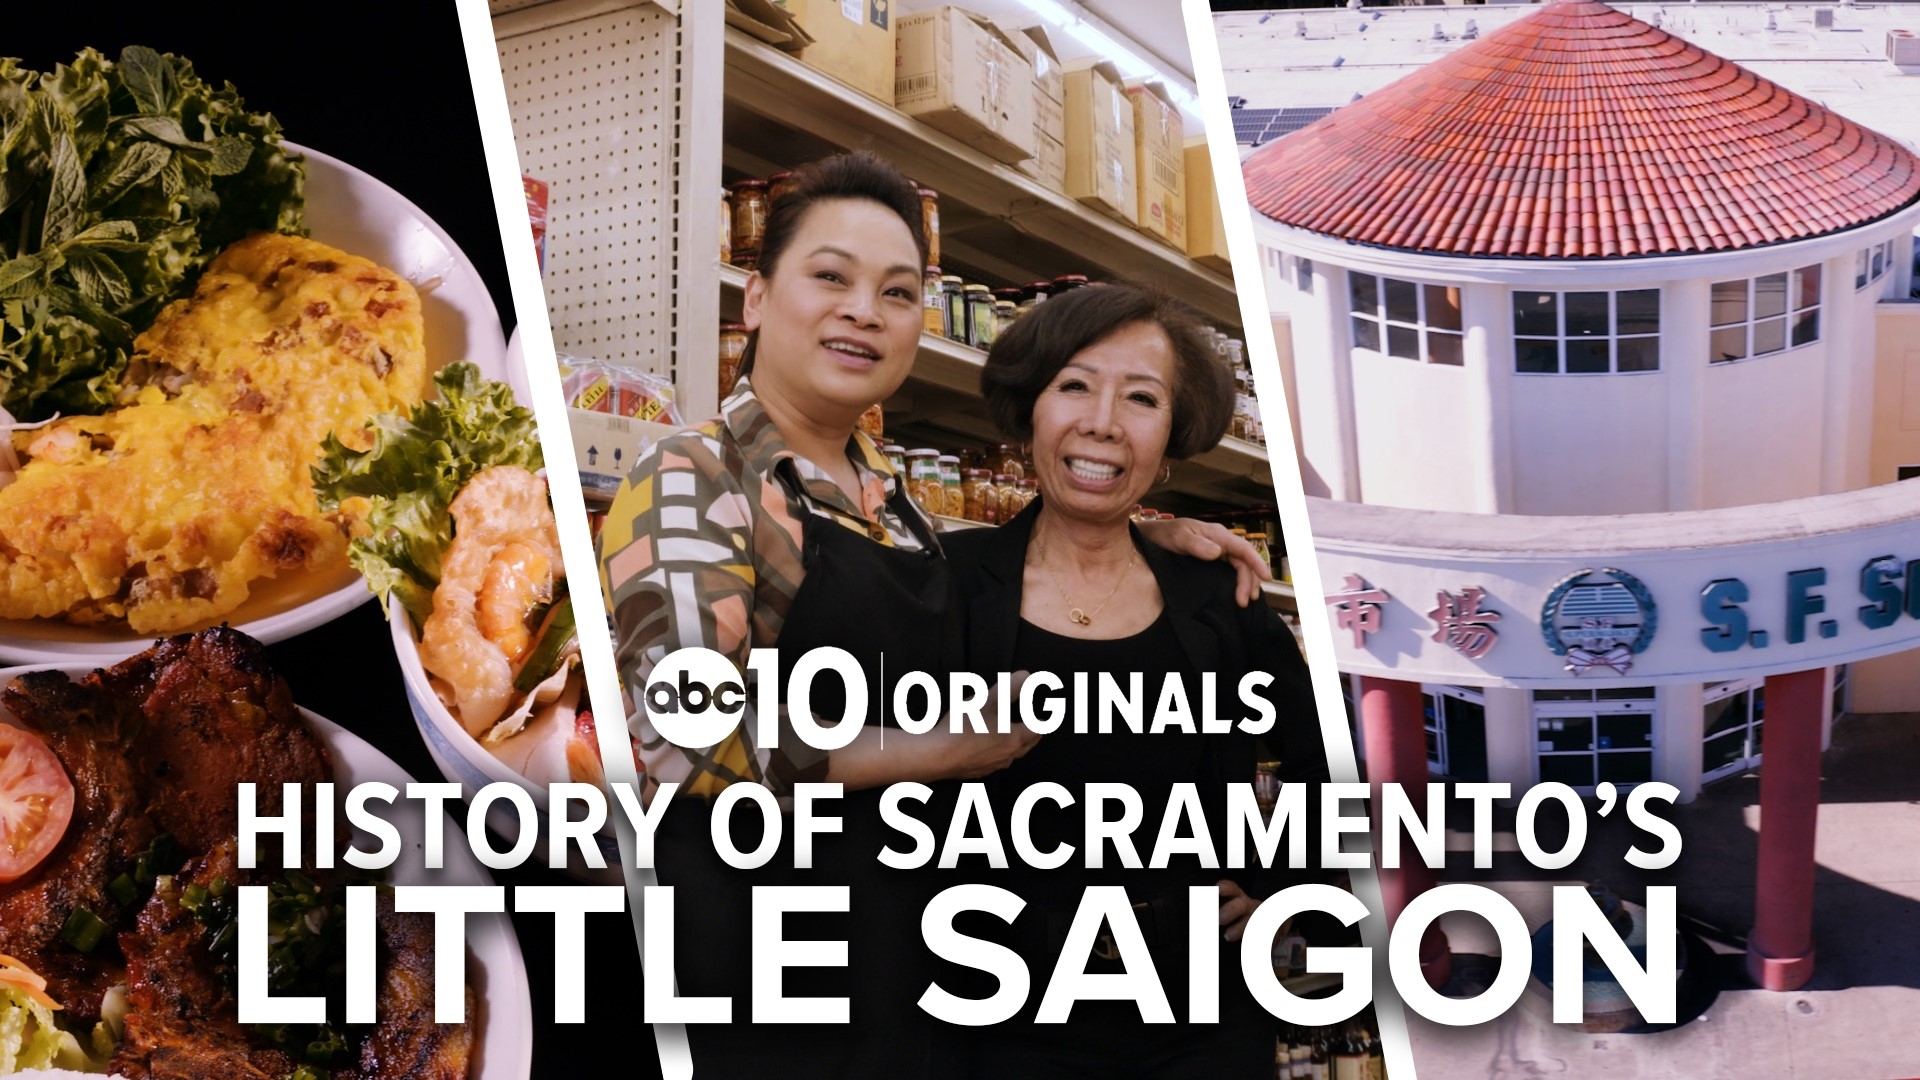 In Sacramento, the Vietnamese community built Little Saigon, a cultural hub for diverse Asian food, events, and local business.